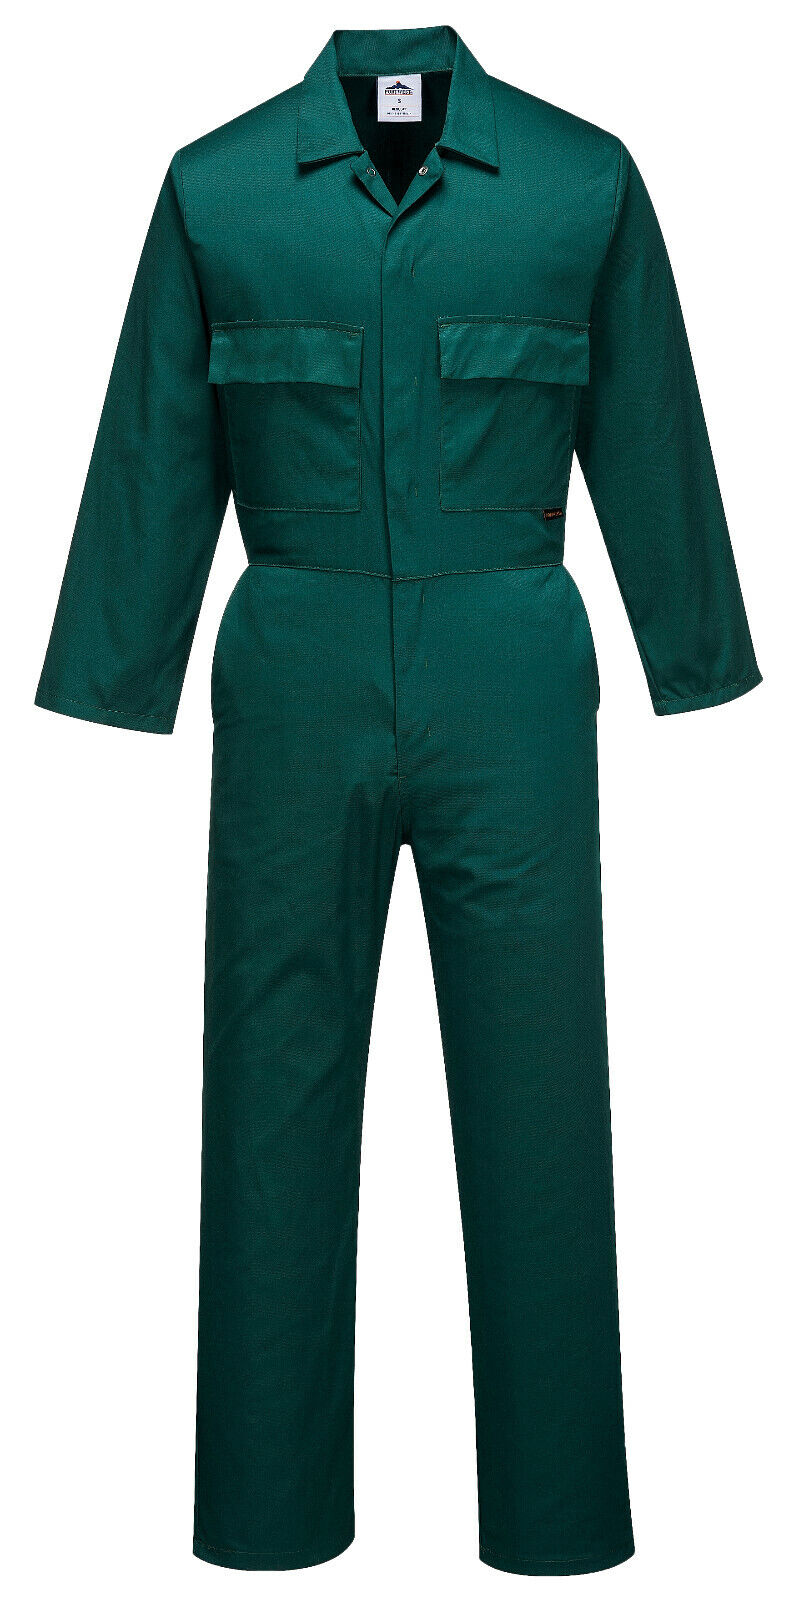 Portwest S999 Euro Work Polycotton Coverall Mechanic Jumpsuit Safety Overalls PORTWEST S999 - фотография #5